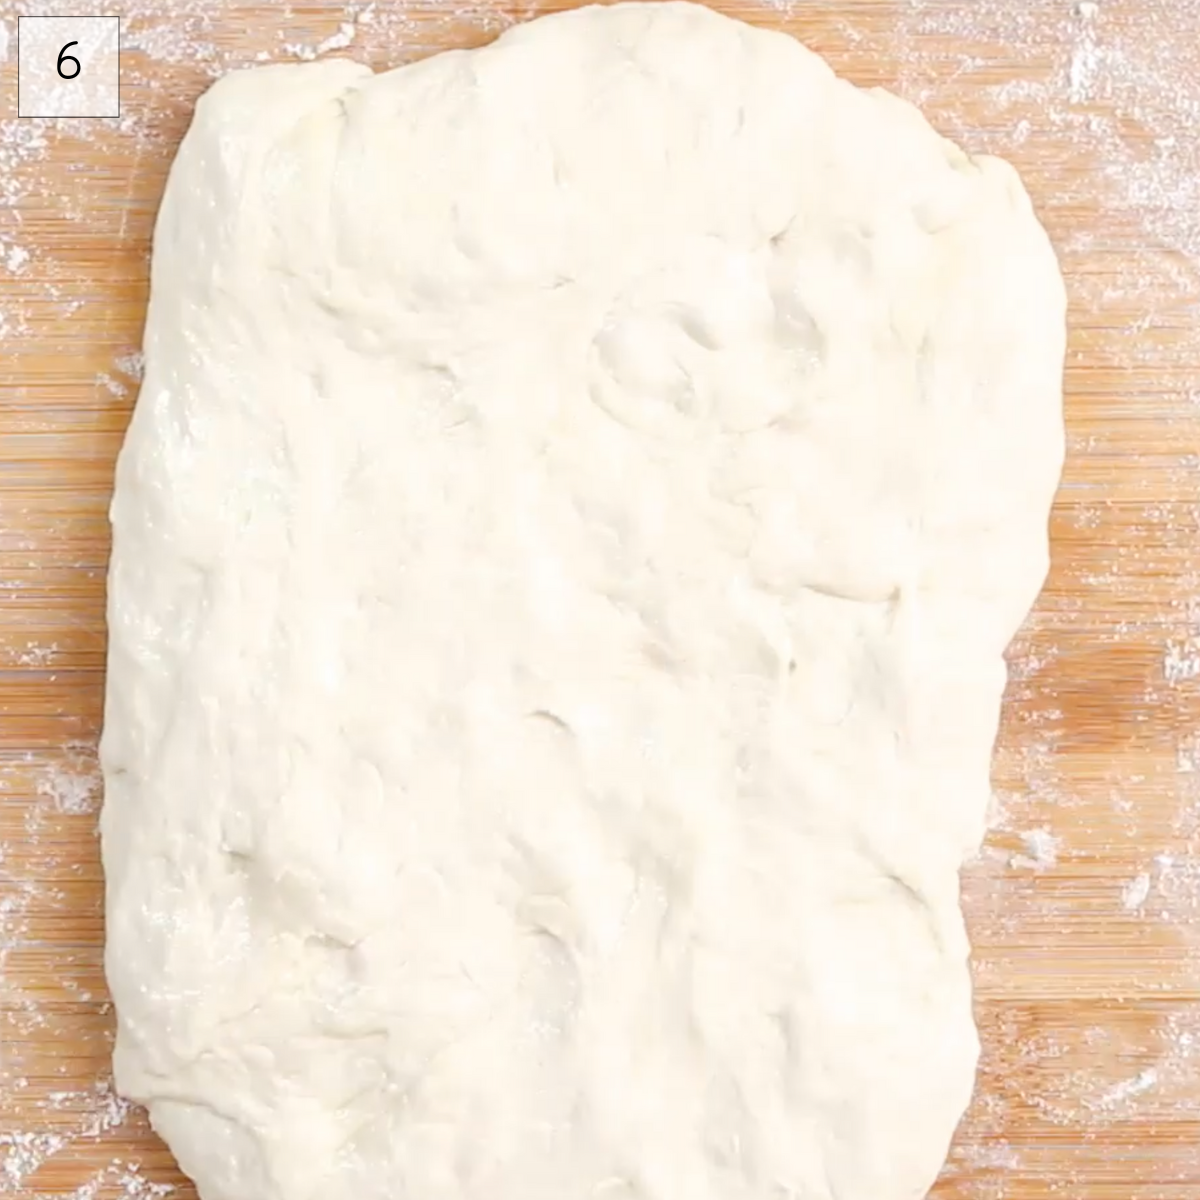 Top down view of bread dough shaped into a rectangle on a floured bread board.